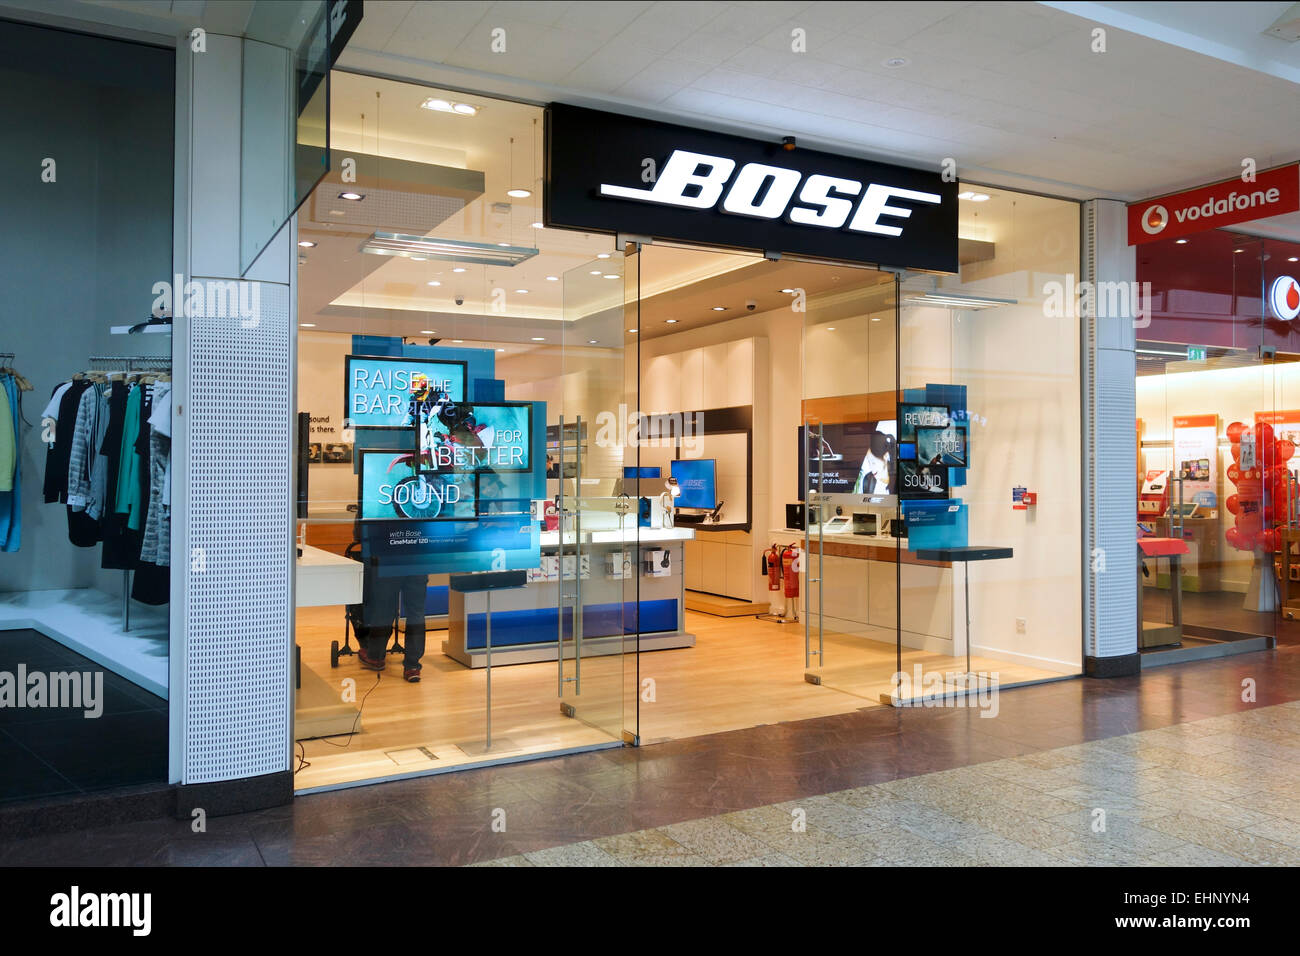 Bose Audio High Resolution Stock Photography and Images - Alamy